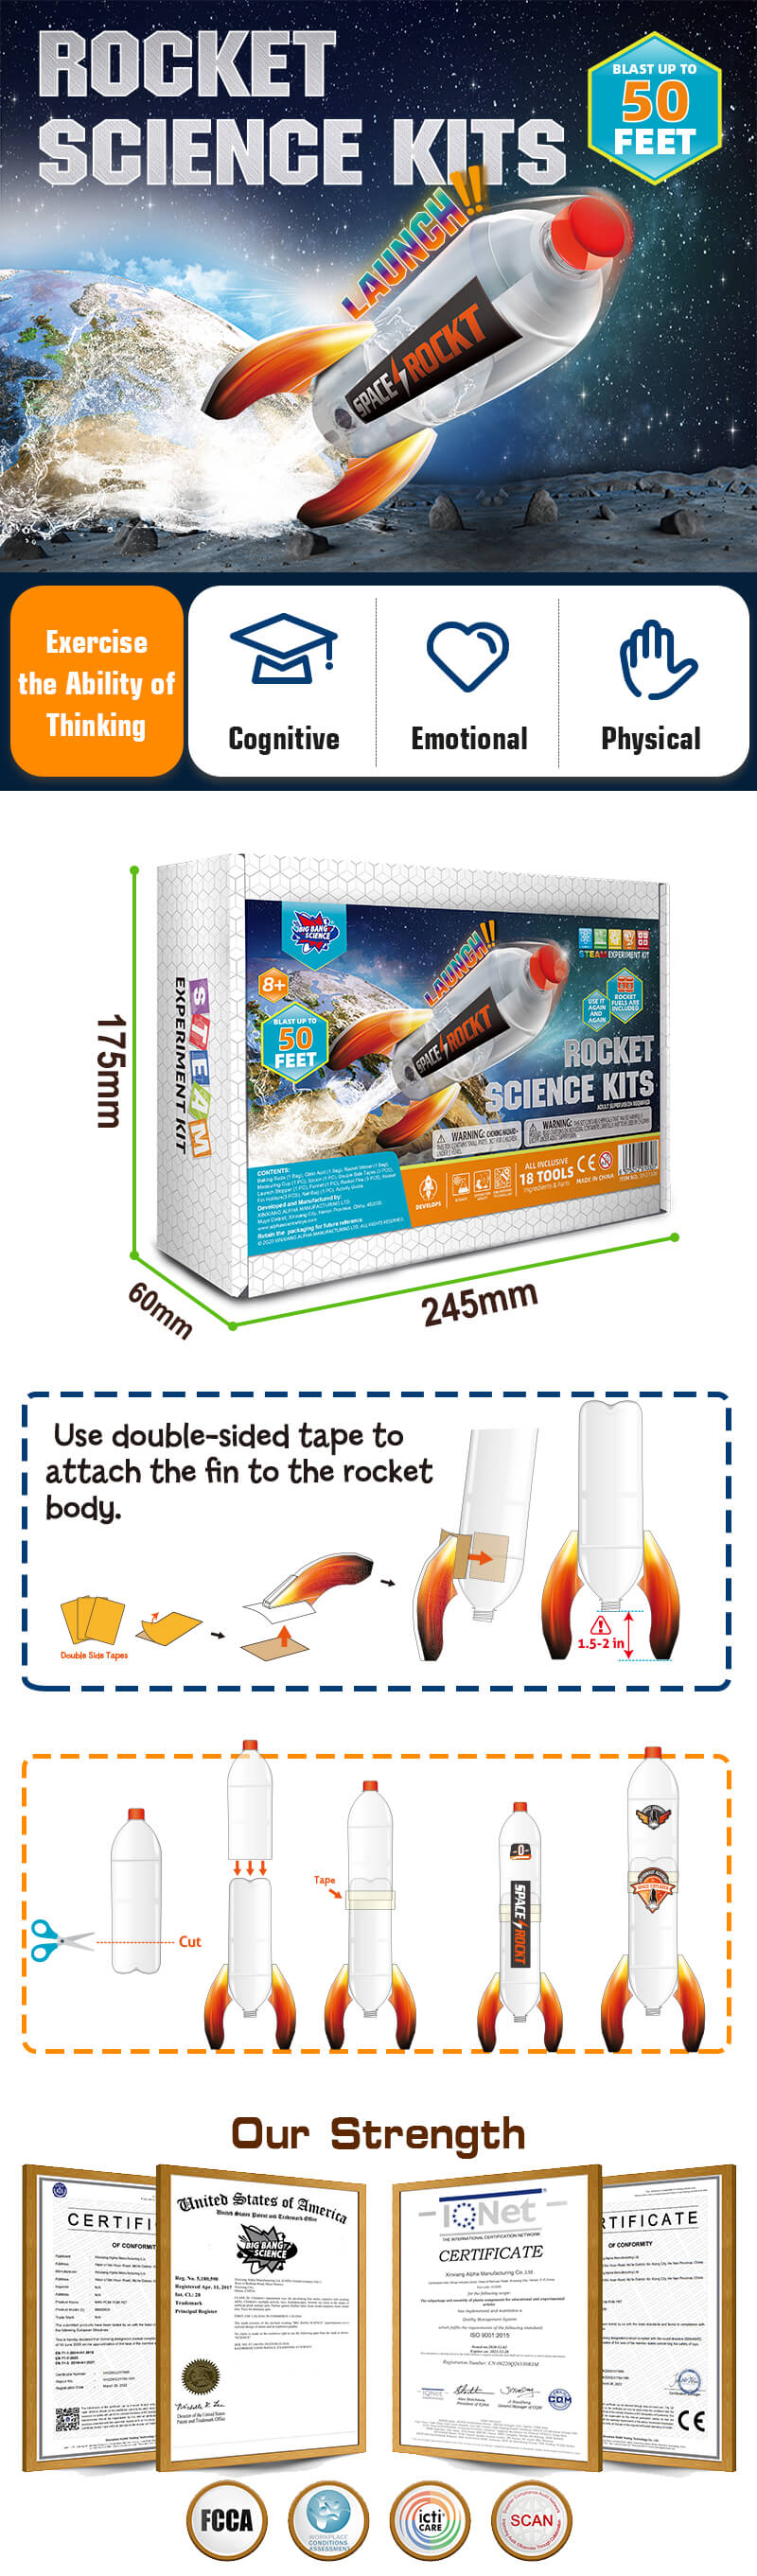 Rocket-Science-Kits-Product-details-chart